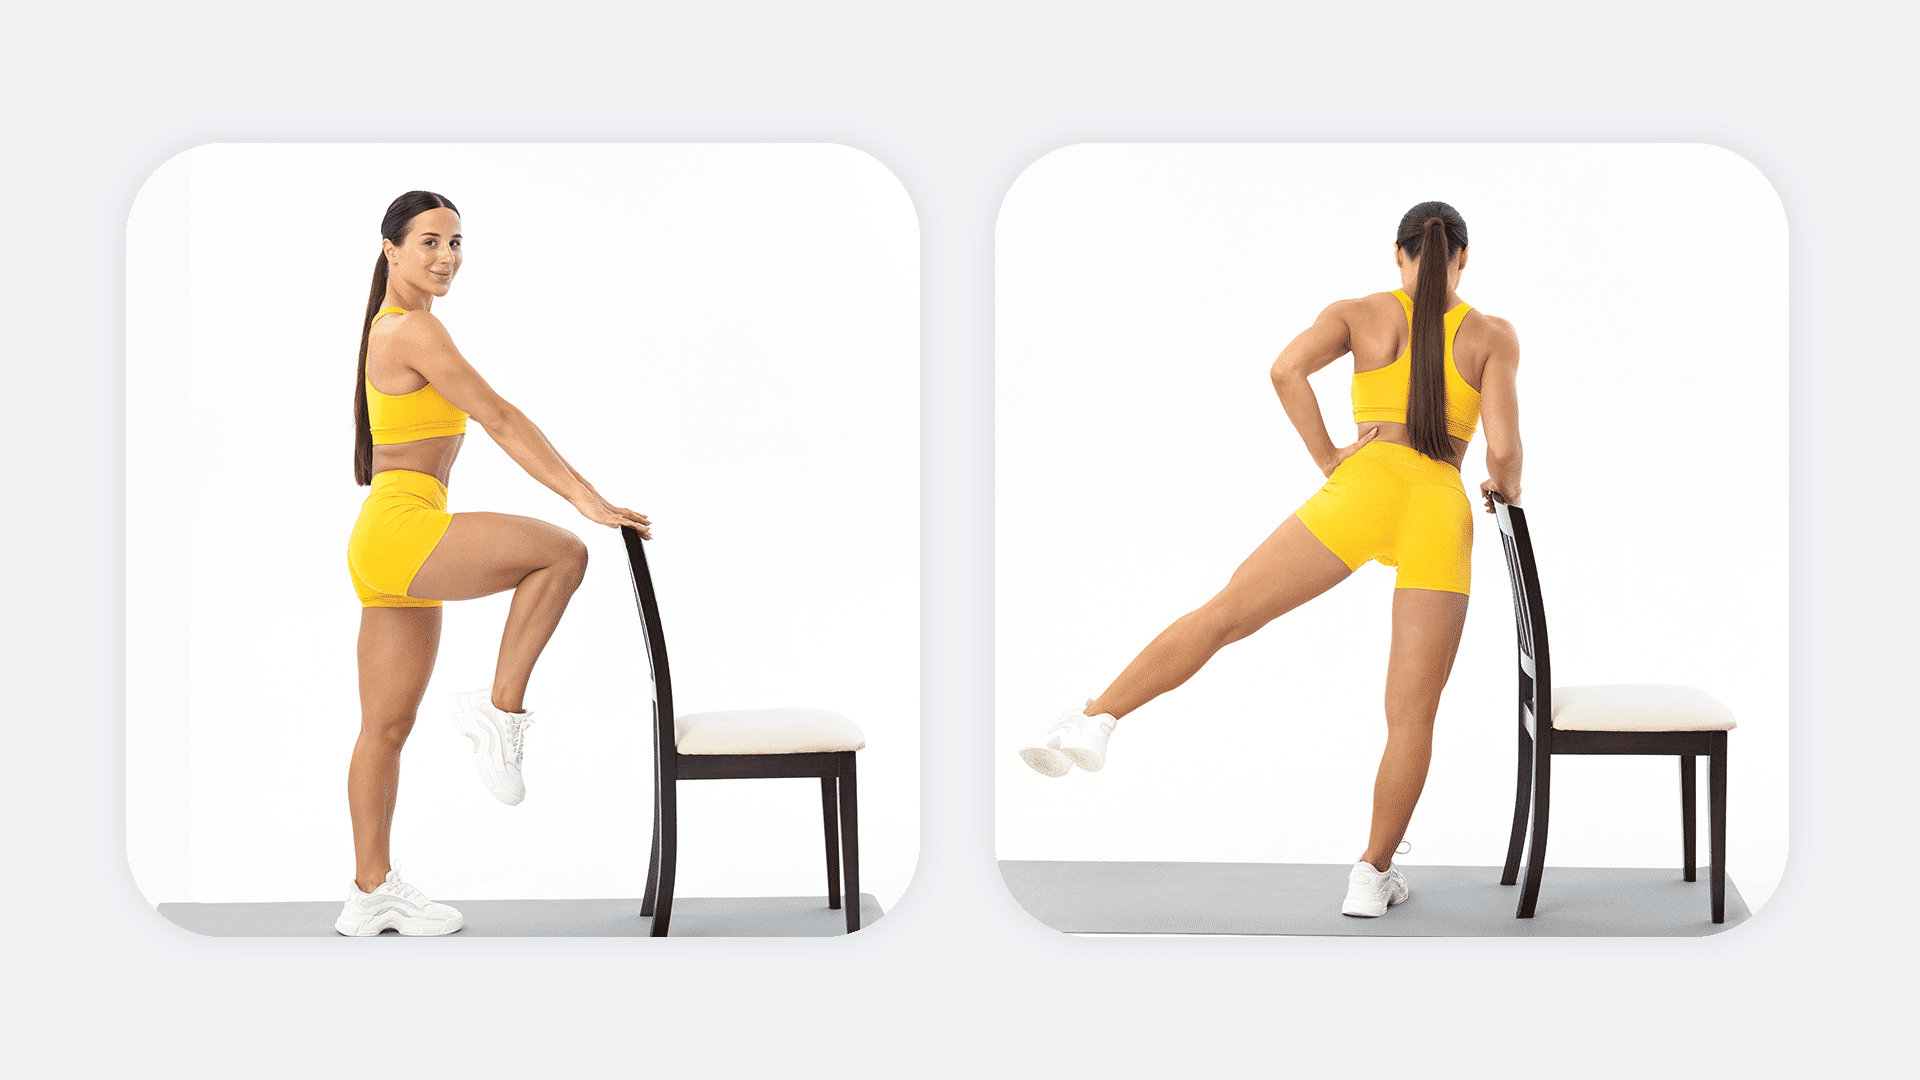 Chair Pose Variations: 4 You May Want to Try - YogaUOnline